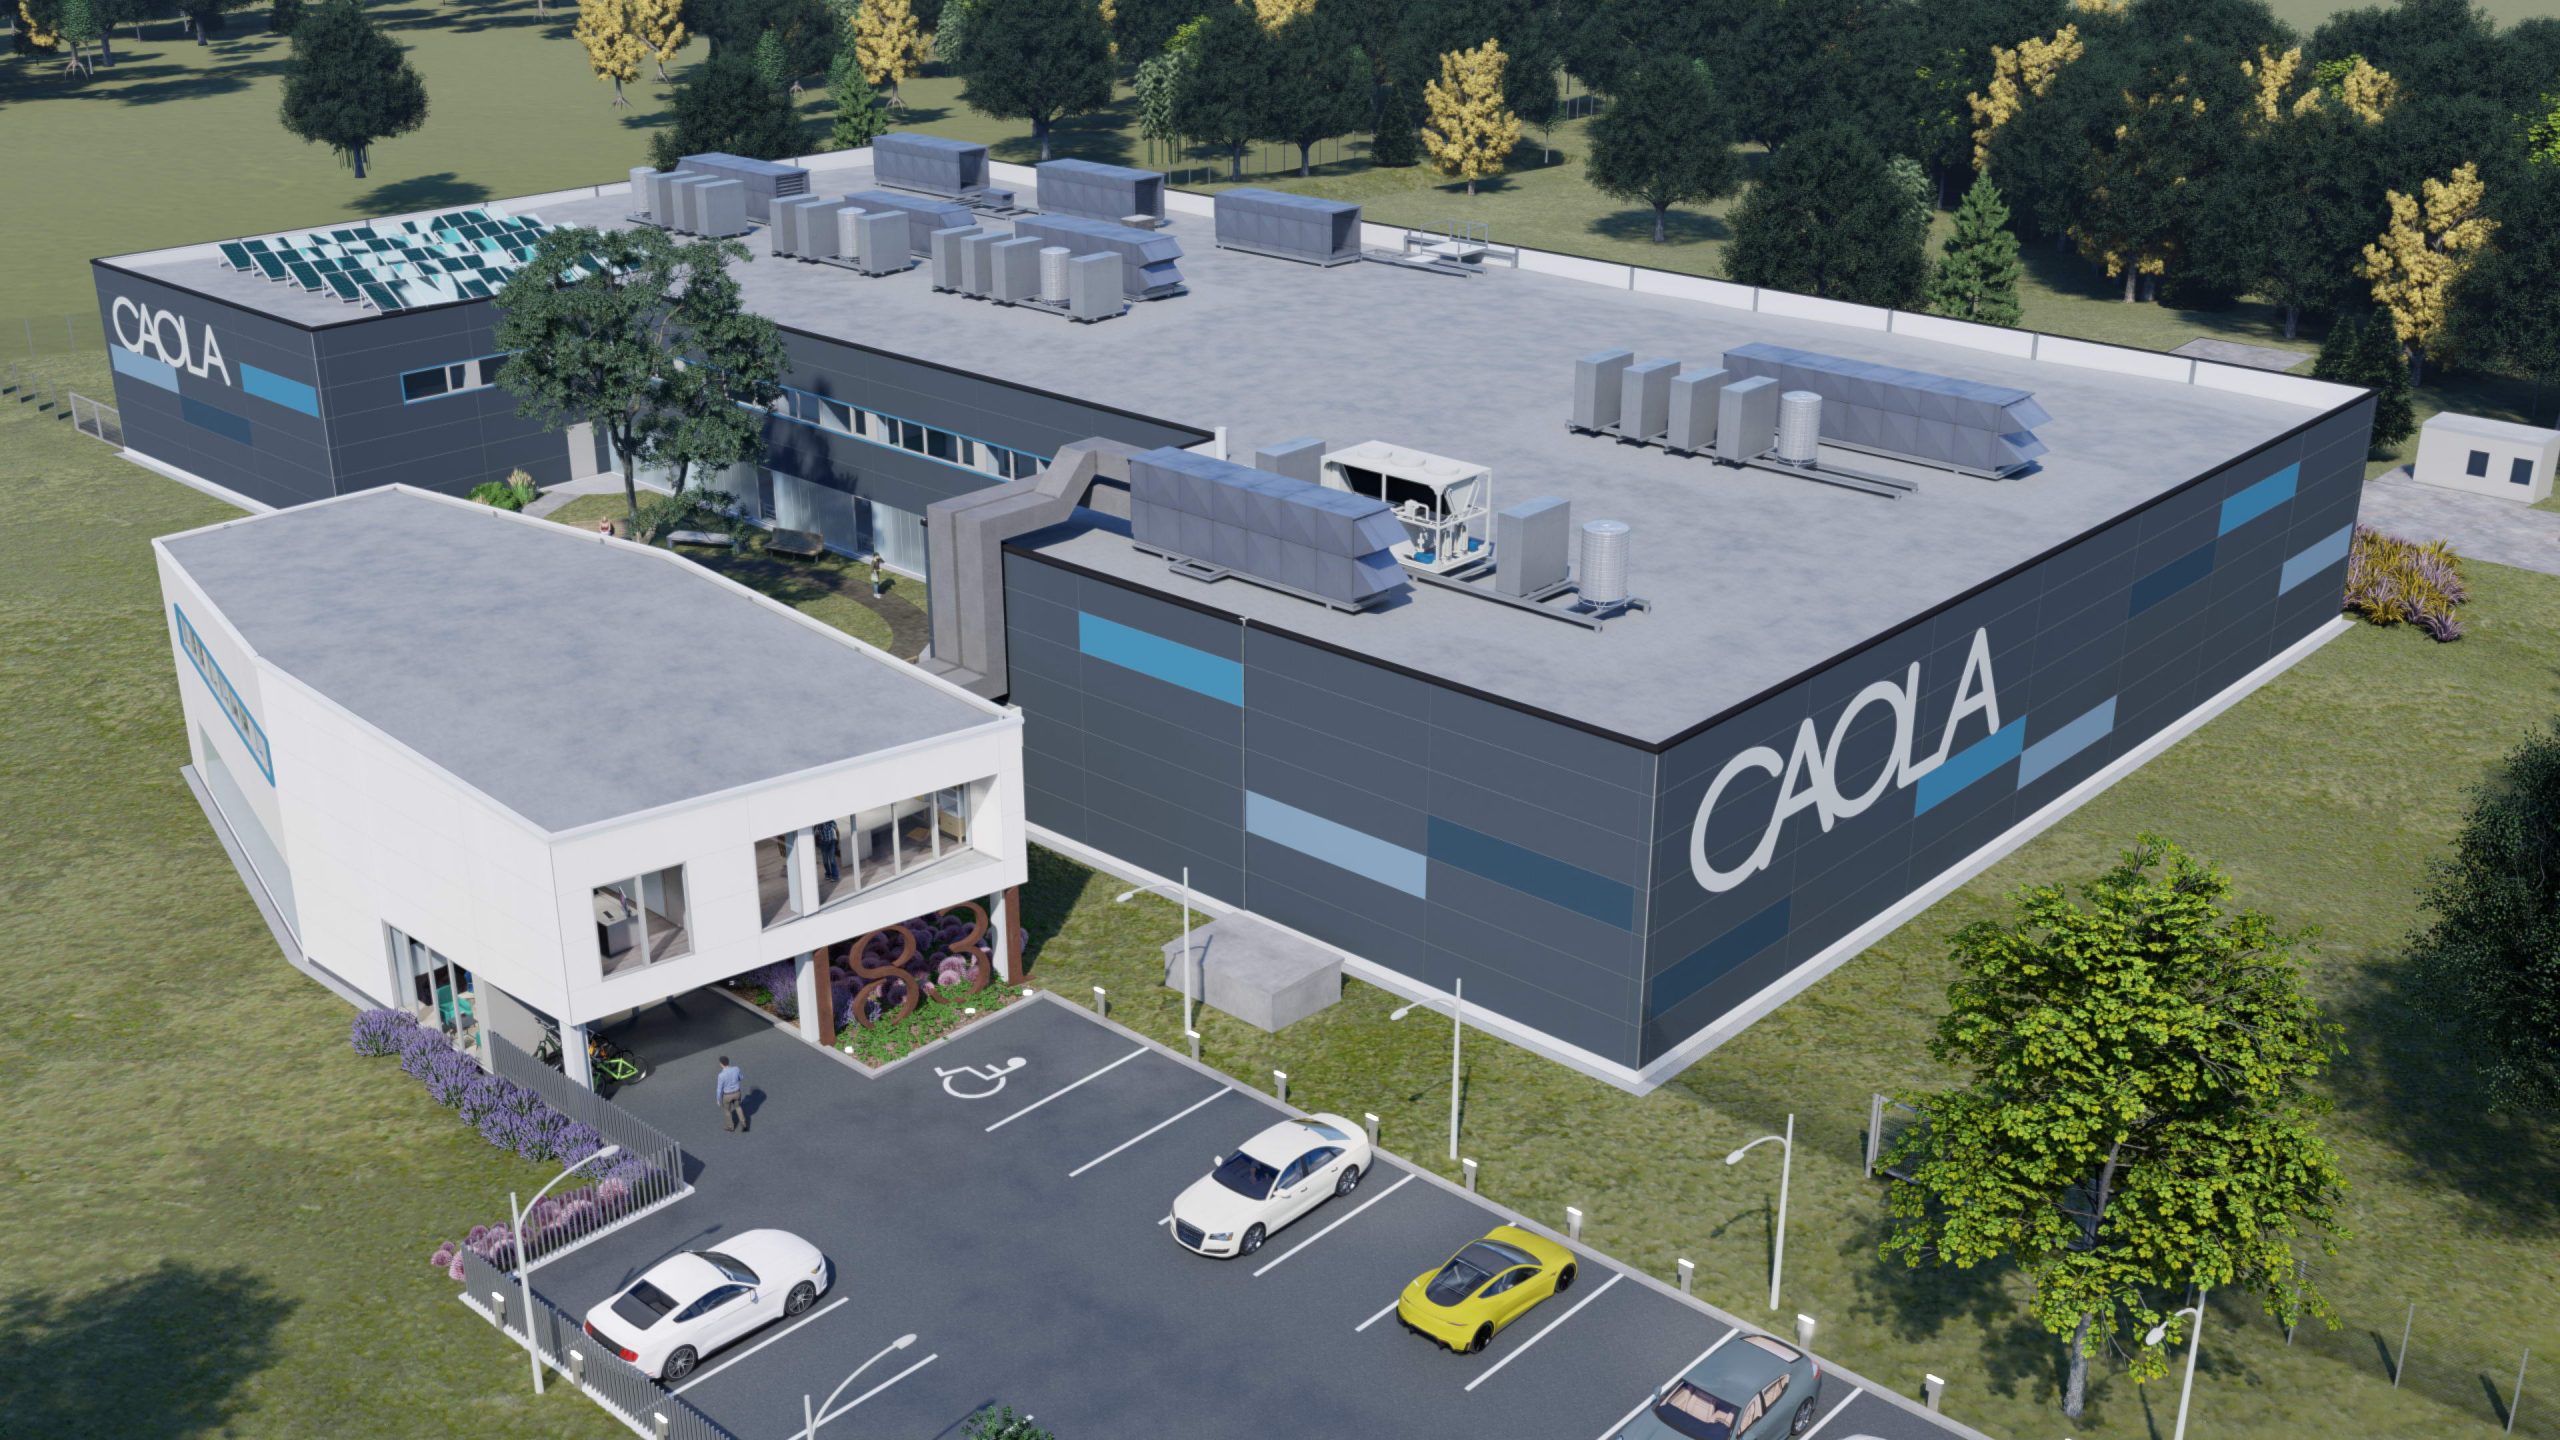 THE NEW FACTORY BUILDING OF CAOLA